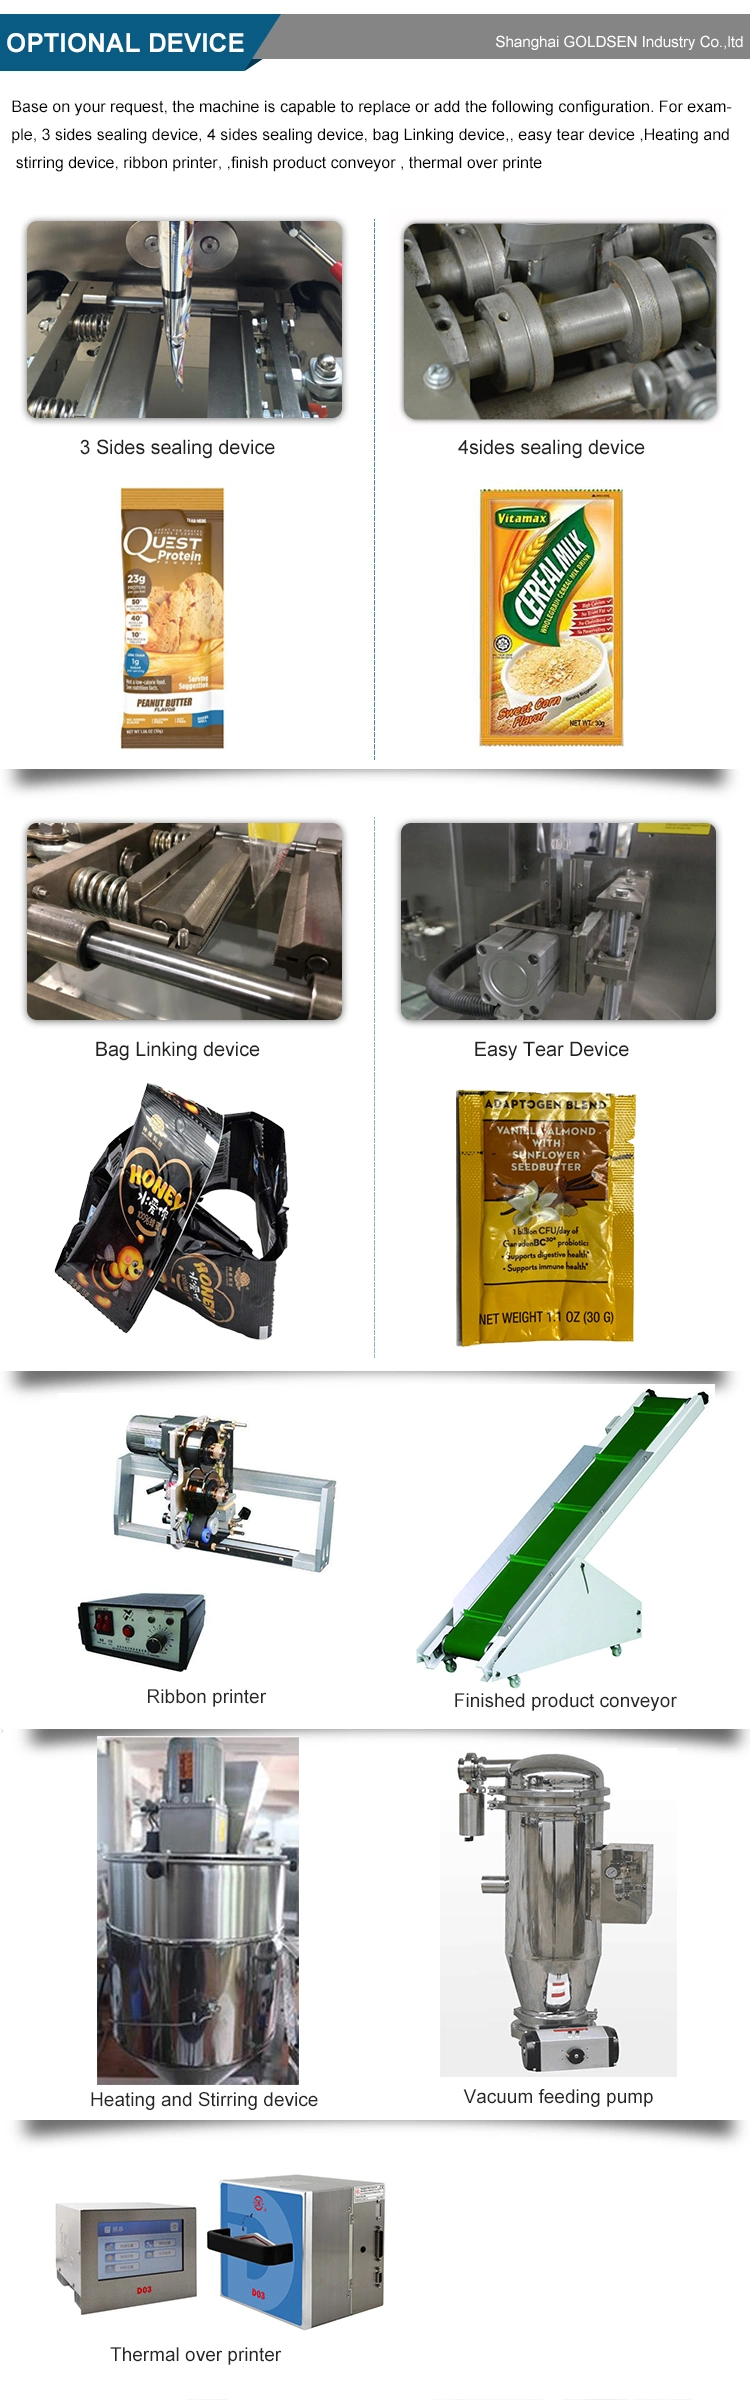 Ketchup Chilli Oil Sauce Packet Small Sachet Packaging Machine Price